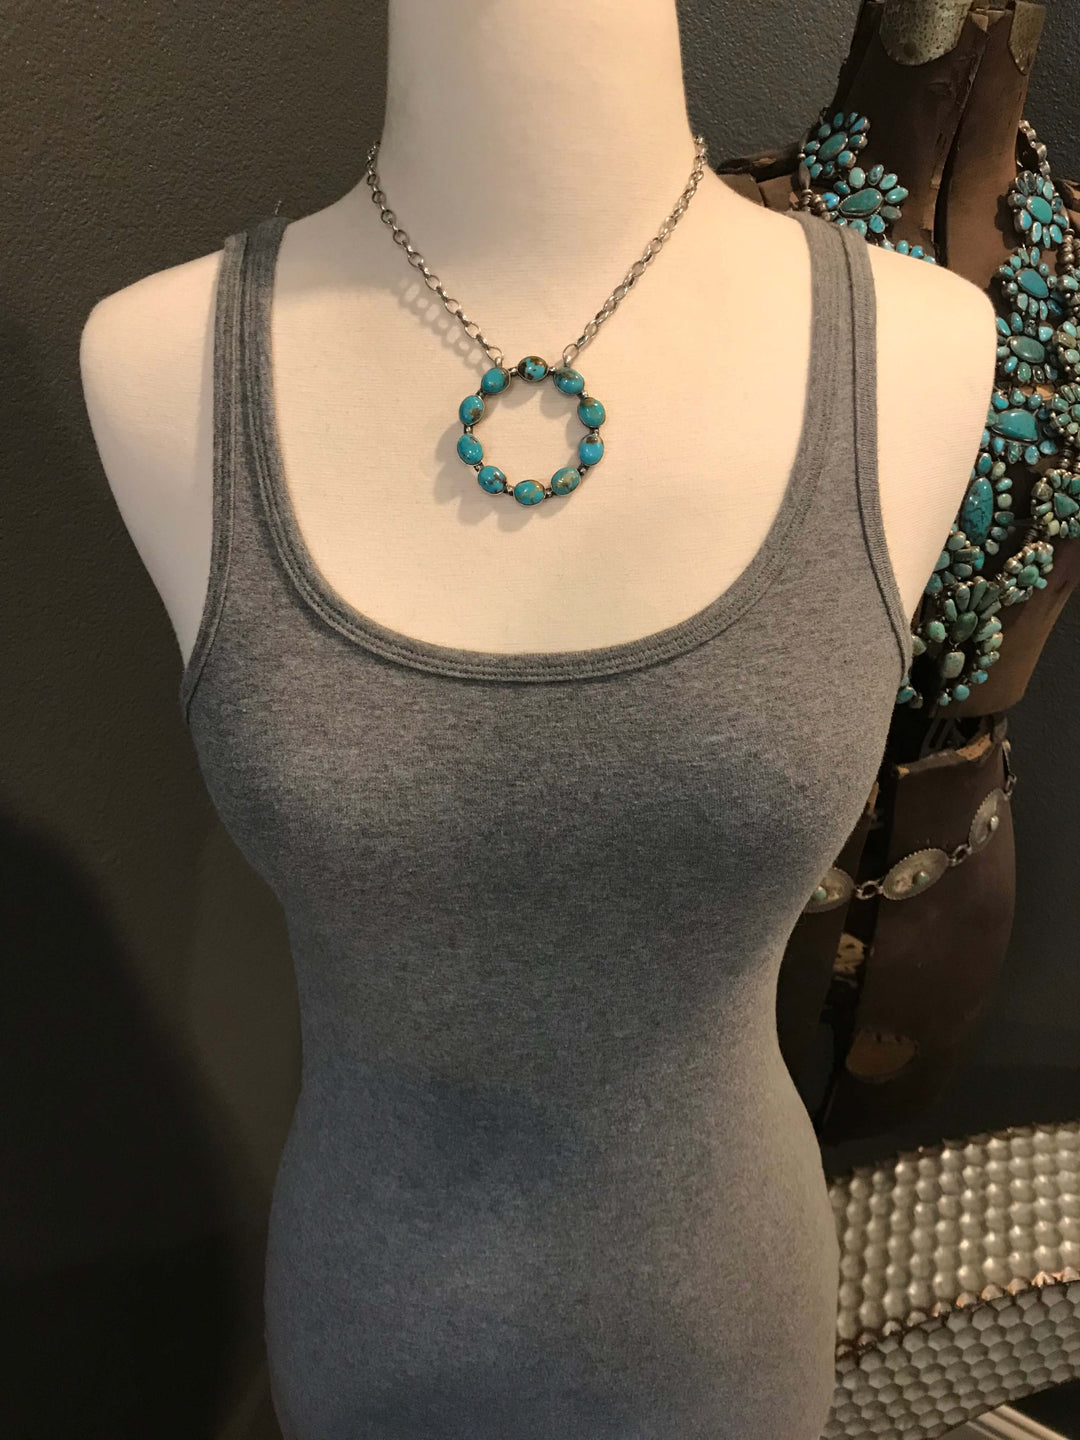 The All-Around Turquoise Necklace, 3-Necklaces-Calli Co., Turquoise and Silver Jewelry, Native American Handmade, Zuni Tribe, Navajo Tribe, Brock Texas